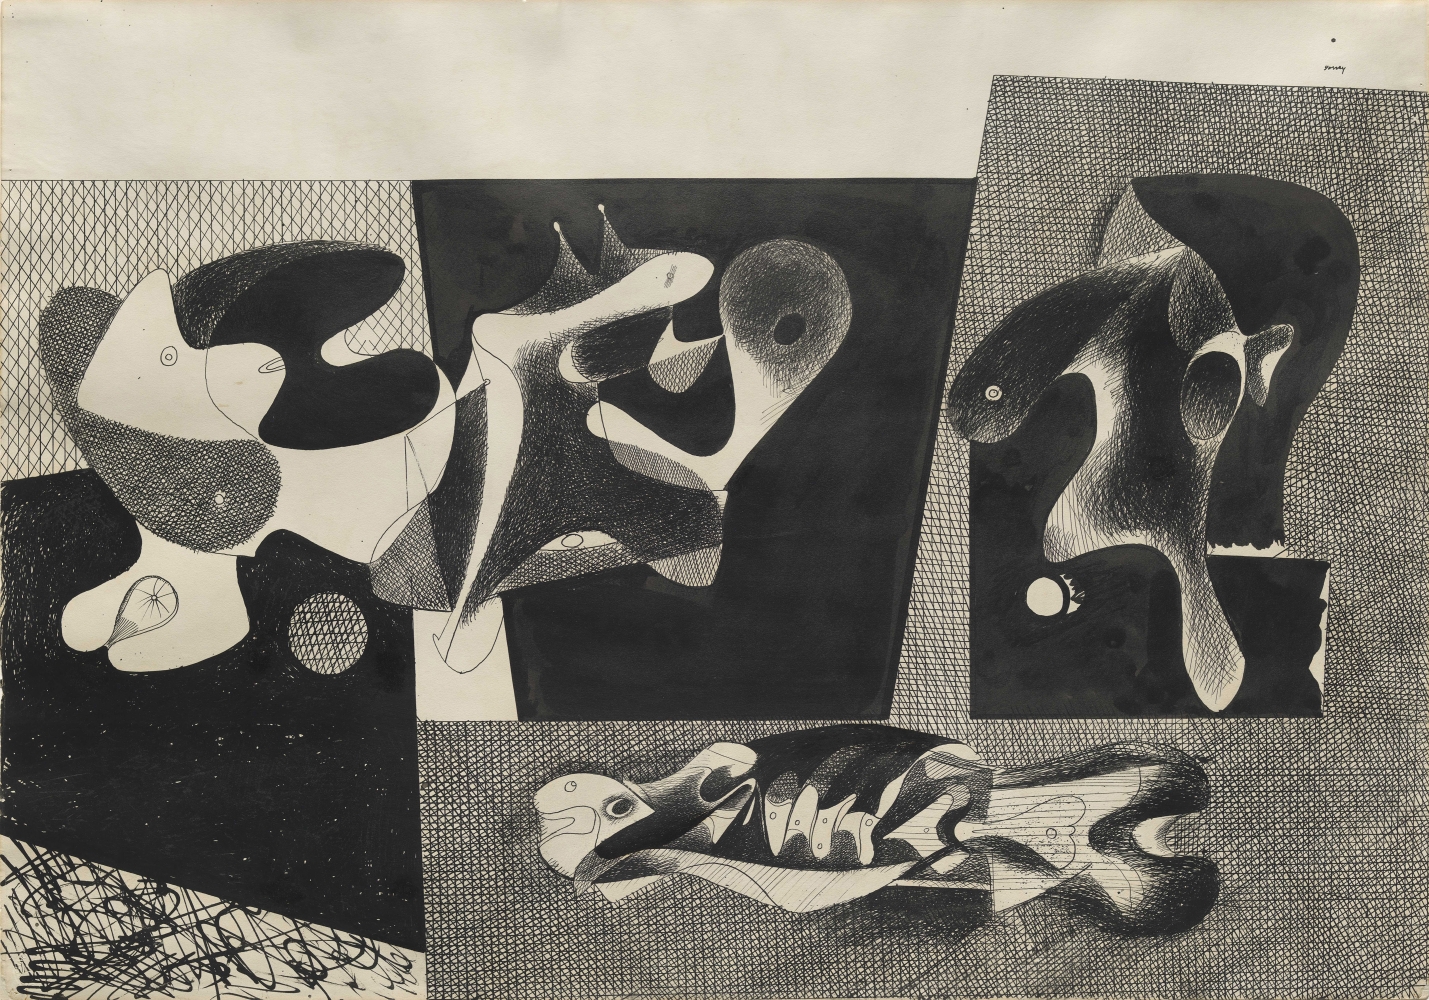 Nighttime, Enigma, and Nostalgia: Fish and Head, c. 1932, ink on paper, 20 1/8 x 28 3/4 in. (51.1 x 73 cm). Hirshhorn Museum and Sculpture Garden, Smithsonian Institution, Washington, D.C., Joseph H. Hirshhorn Purchase Fund, 00.6. Photo: Alex Jamison; Hirshhorn Museum and Sculpture Garden. [AGCR: D0187]